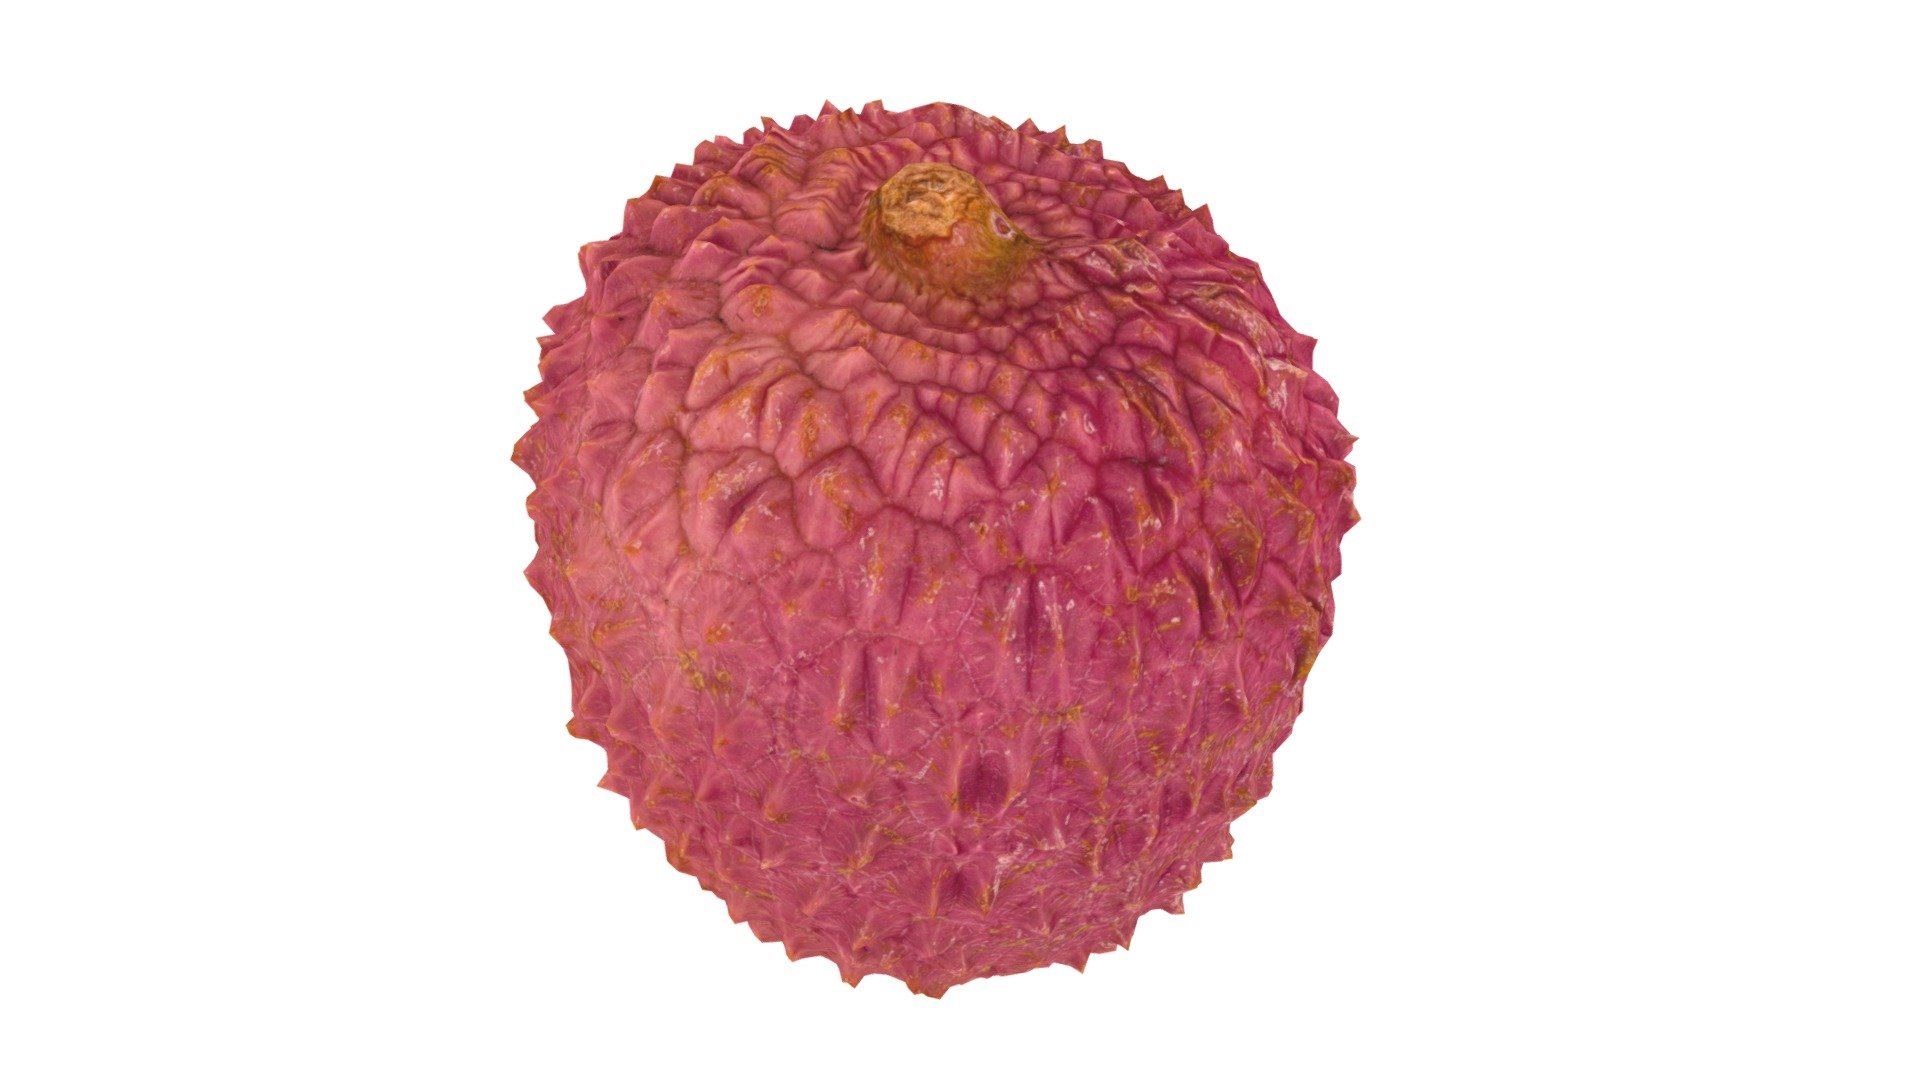 Highly detailed, photorealistic, 3d scanned model of a lychee. 8k textures maps, optimized topology and uv unwrapped.

Model shown here is lowpoly with diffuse map only and 4k texture size.

This model is available at www.thecreativecrops.com 3d model